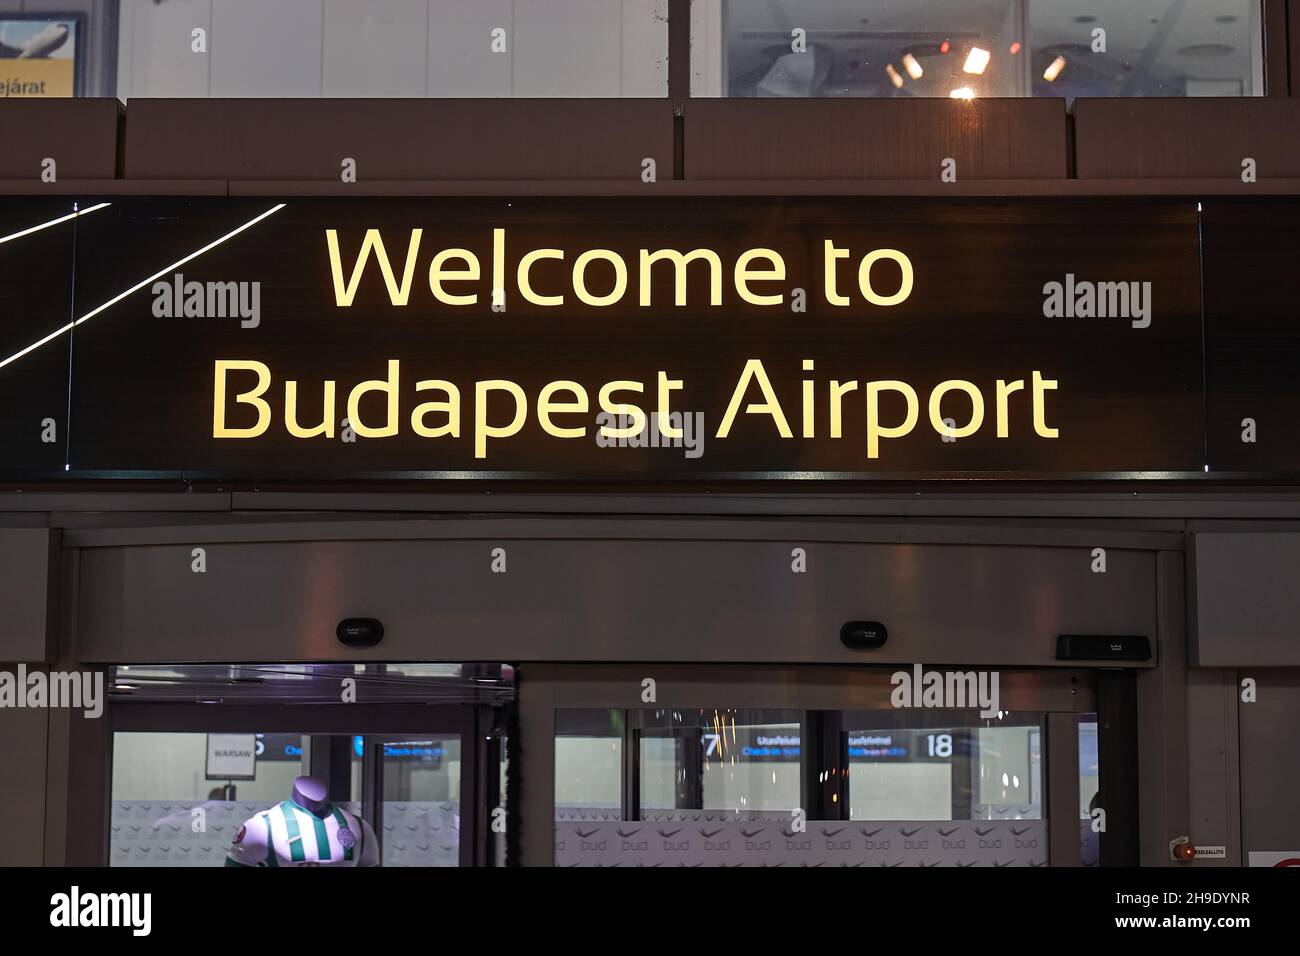 Budapest Airport welcome sign above entrance Stock Photo